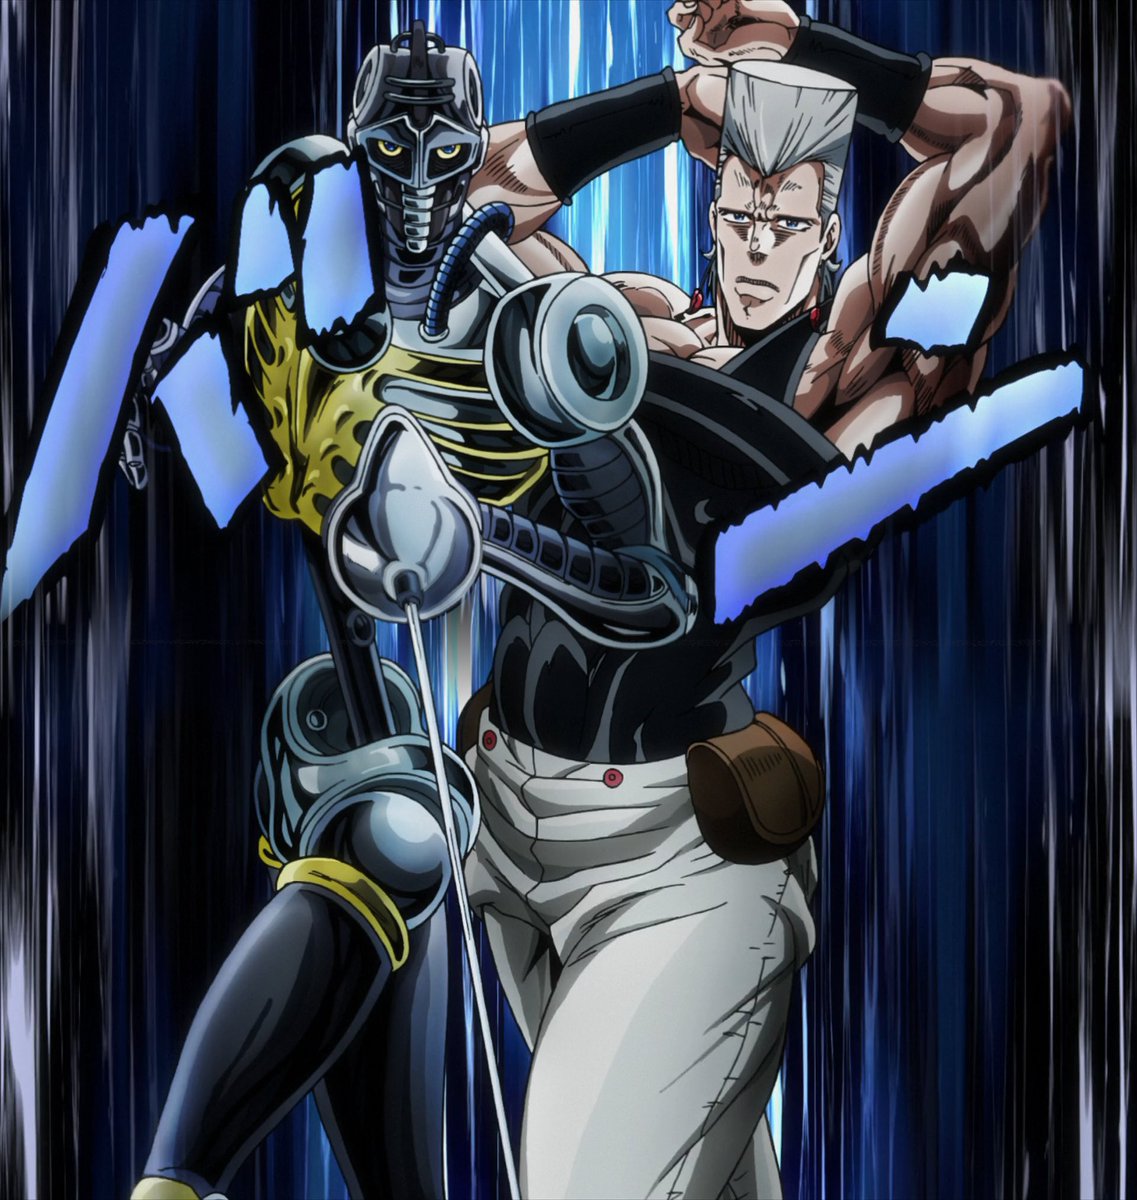 Stand Proud

Callback to Chapter 13 